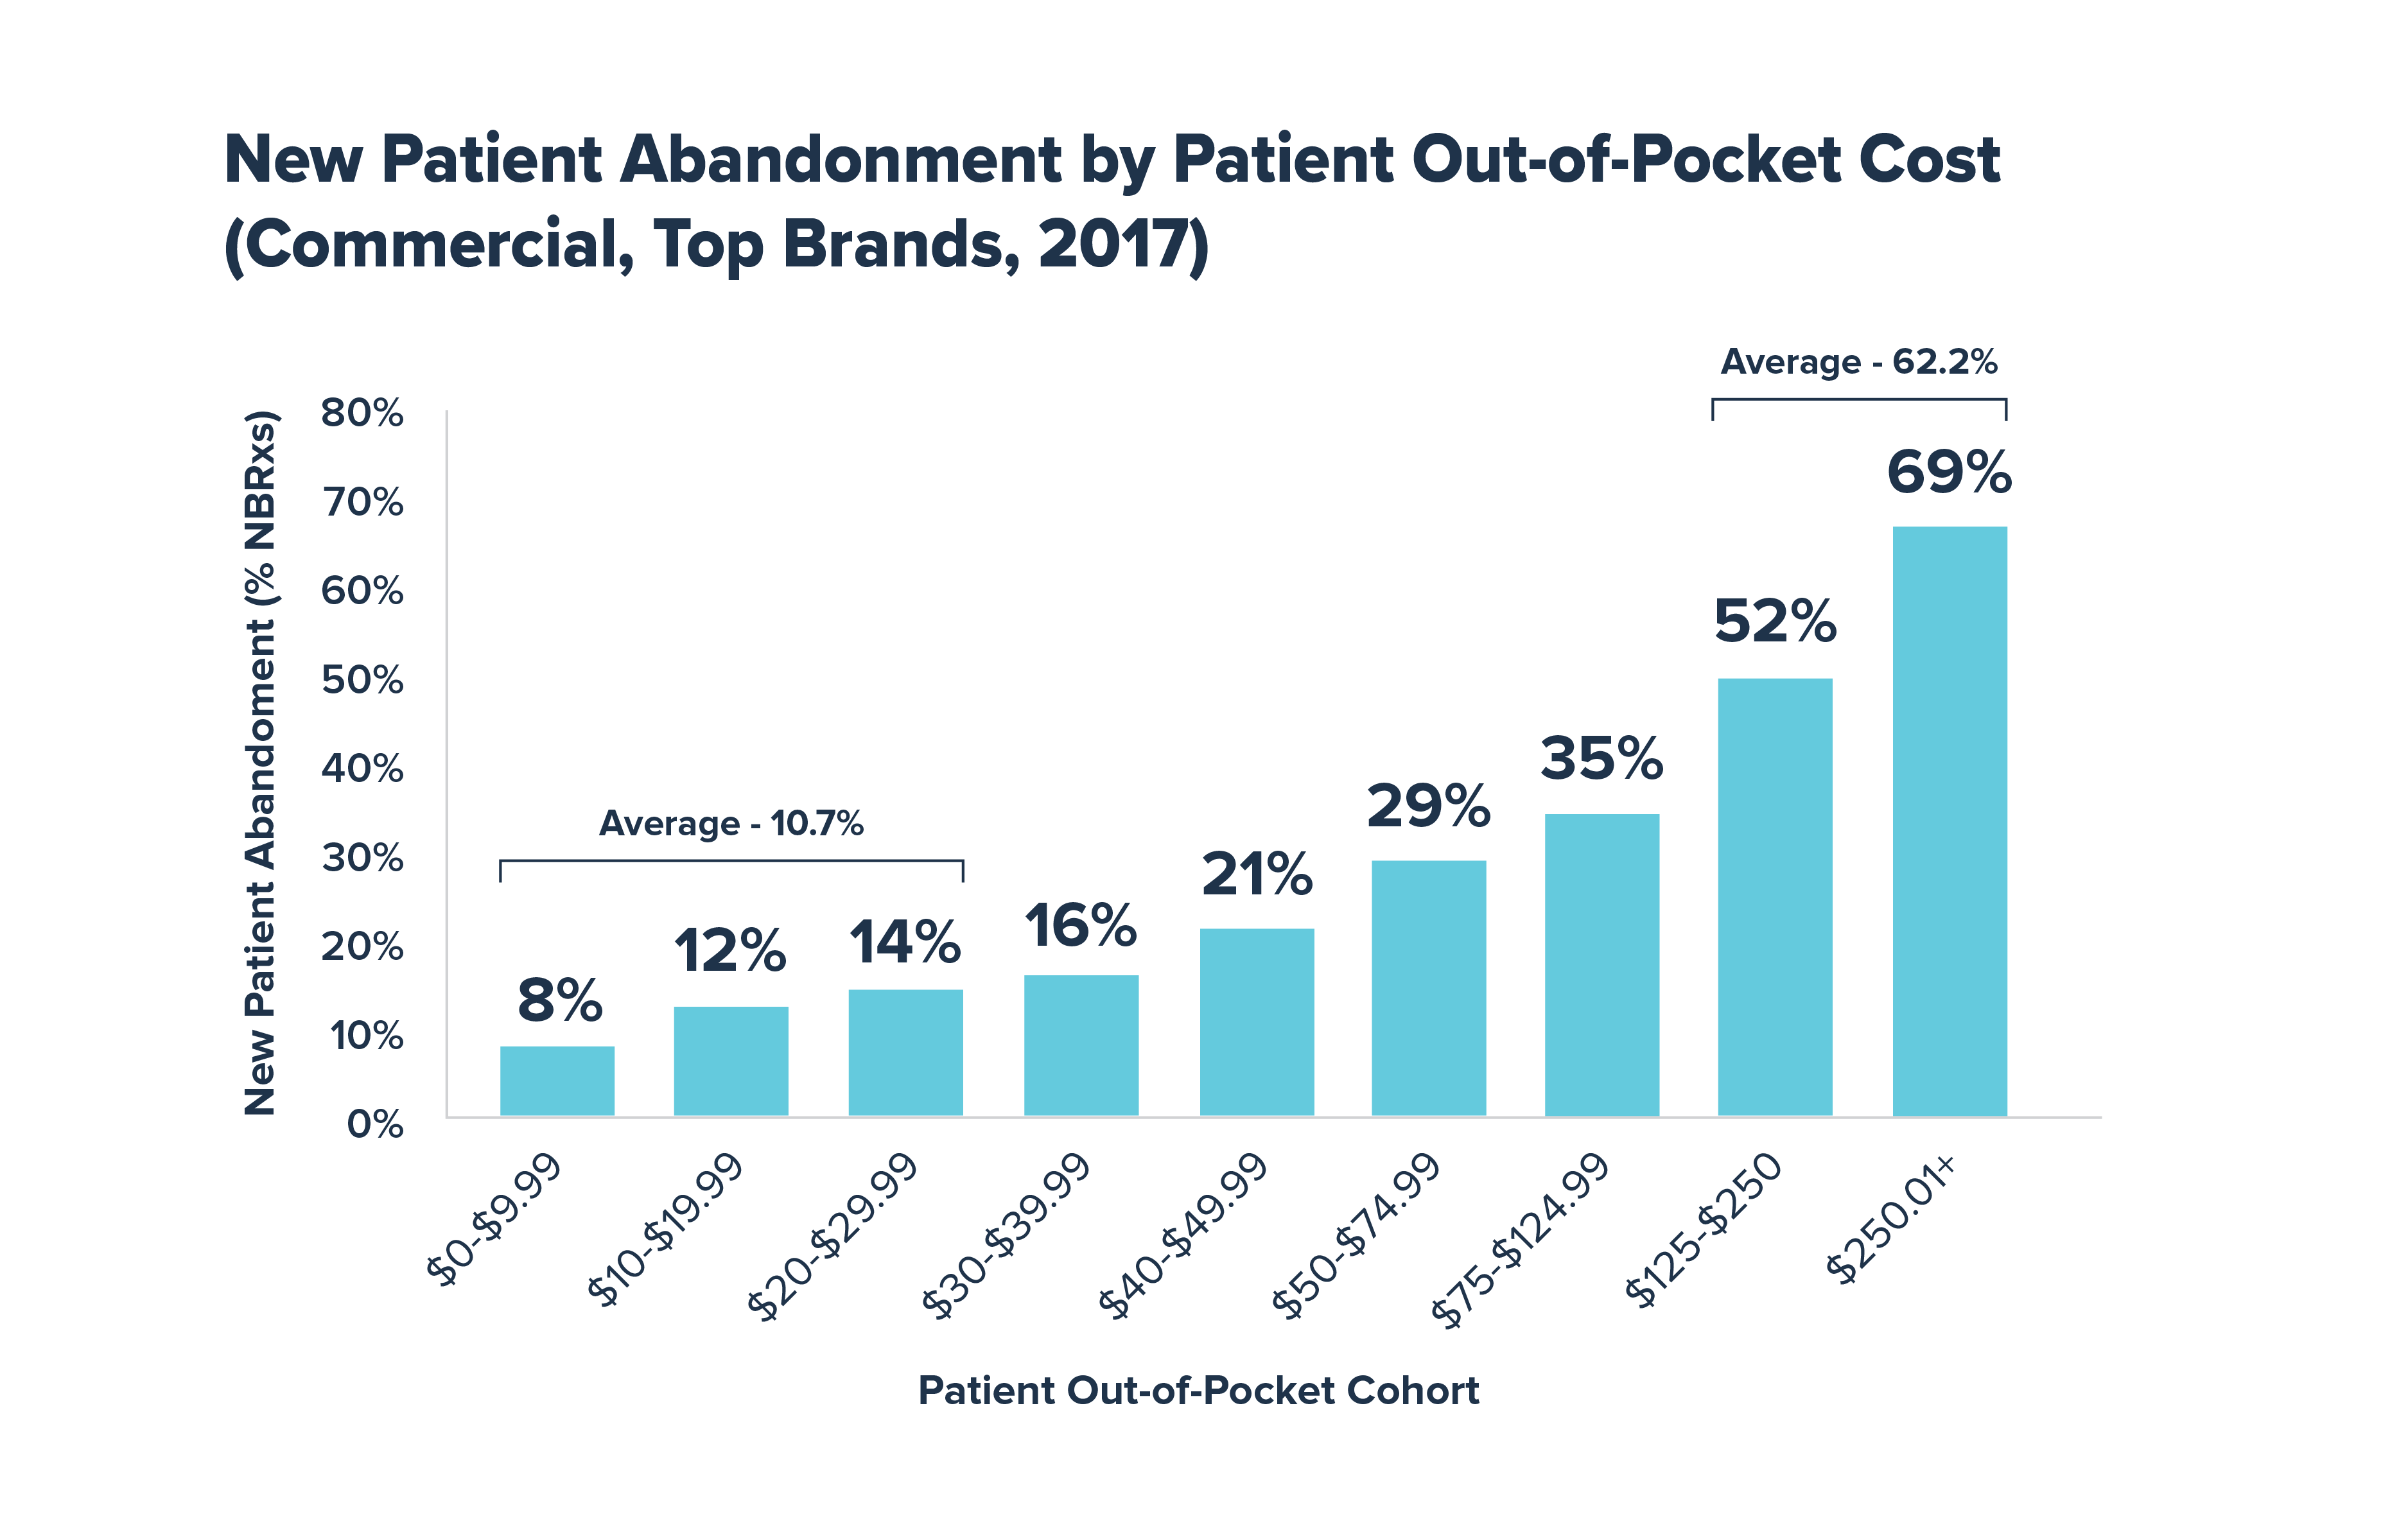 New Patient Abandonment by patient OOP cost